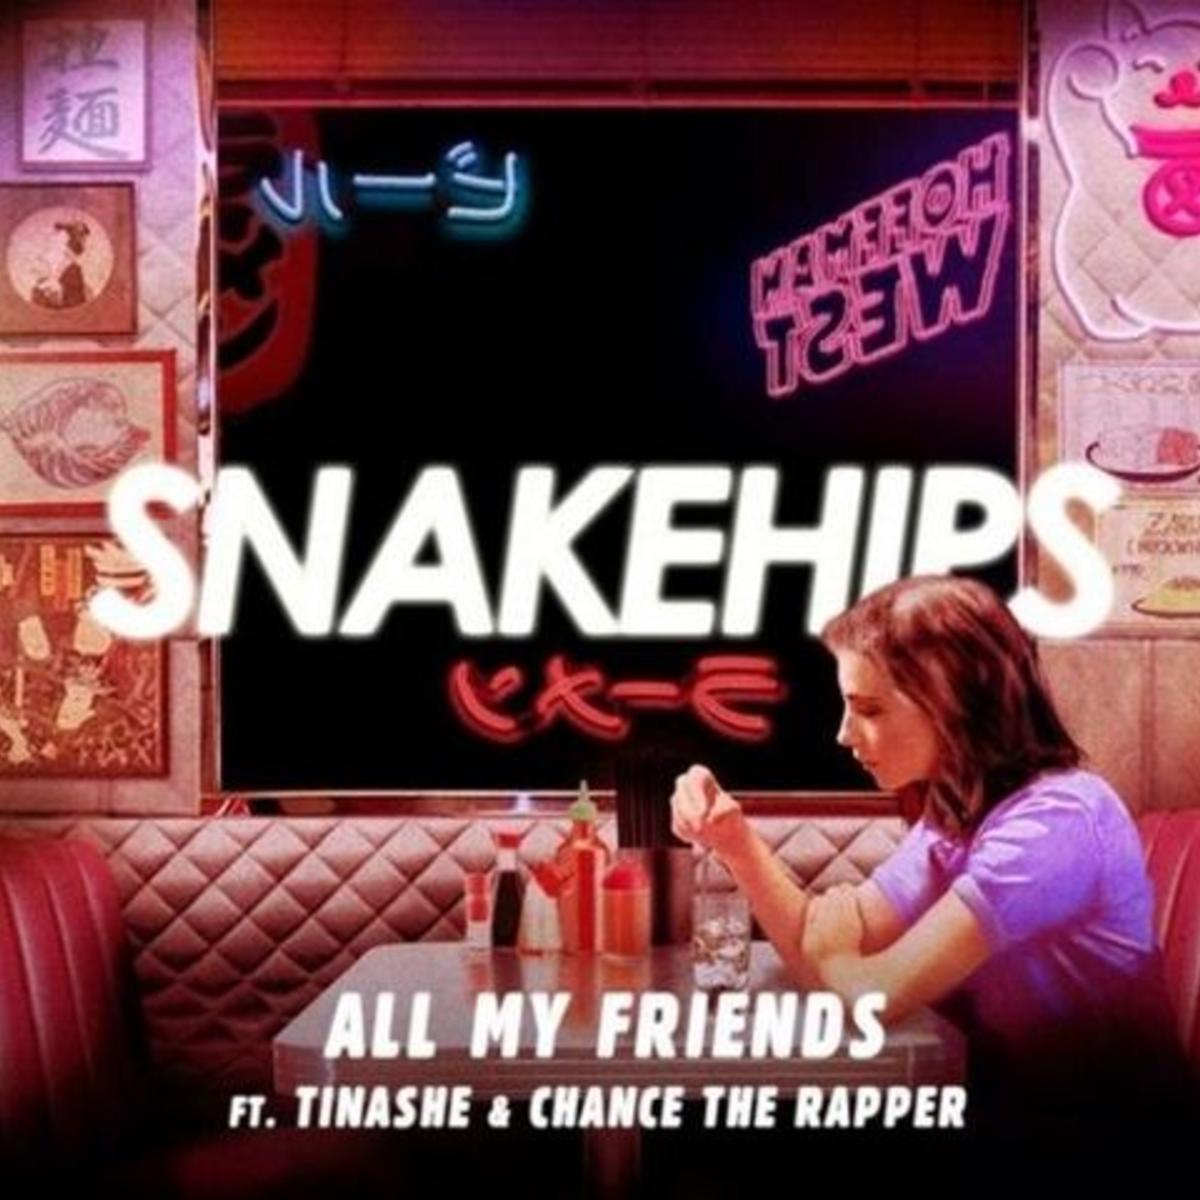 Snakehips - All My Friends Feat. Tinashe & Chance The Rapper